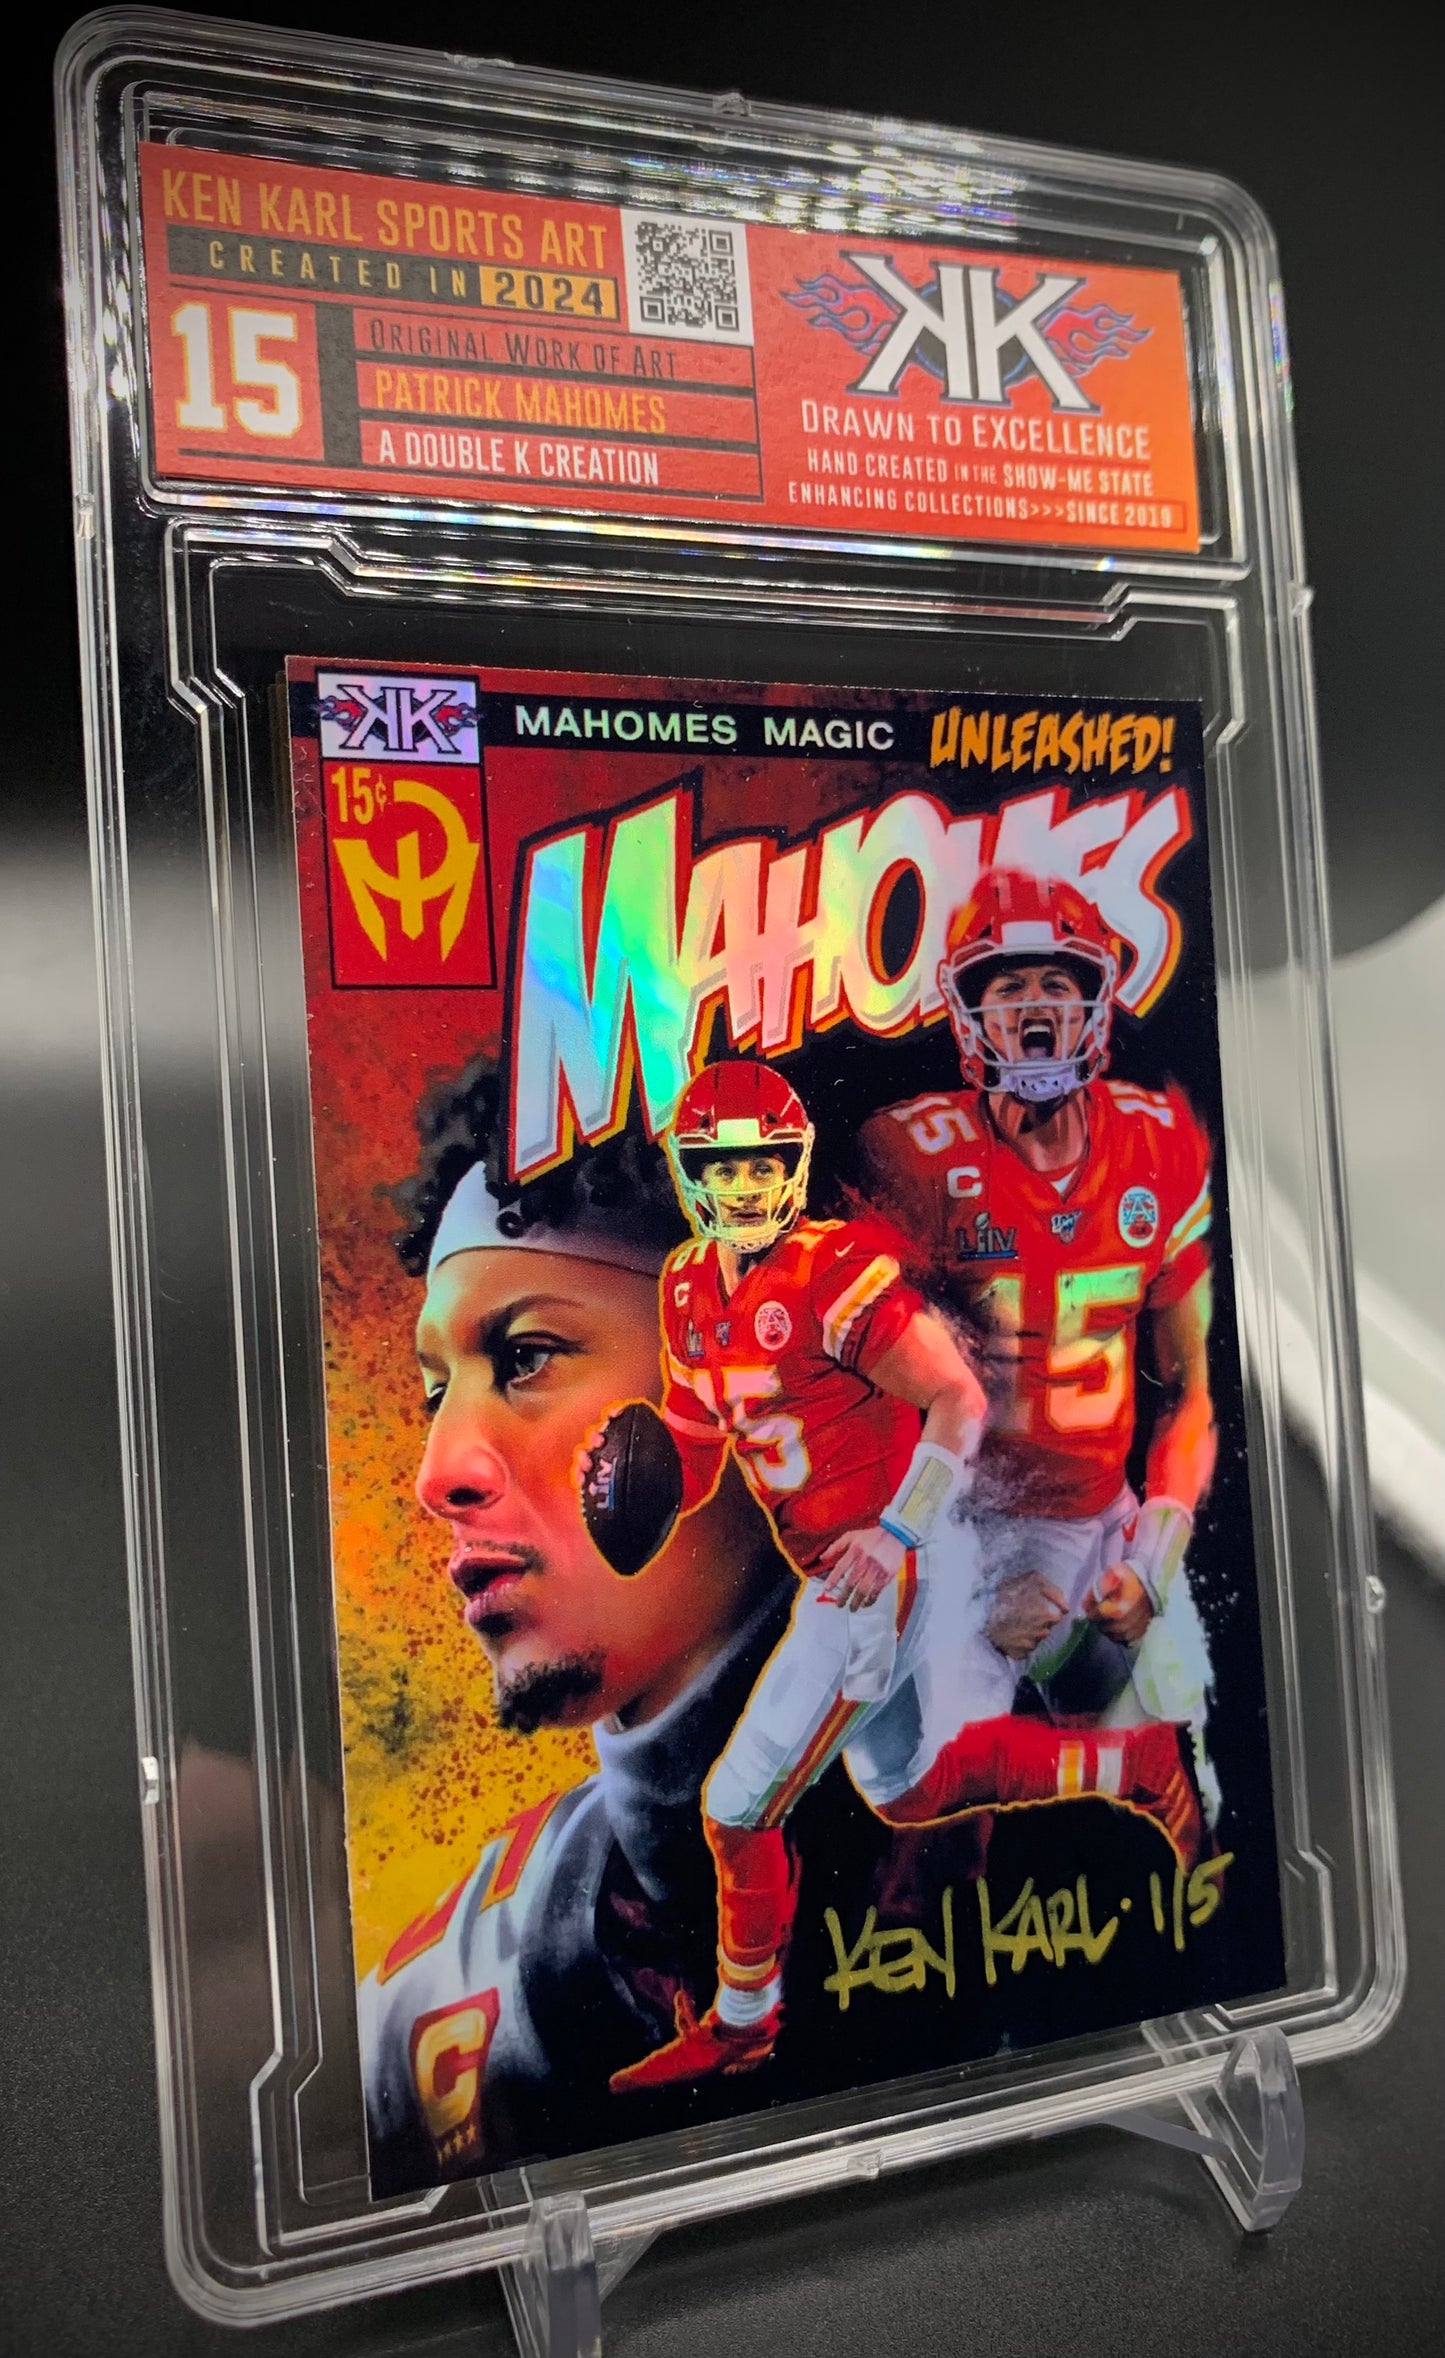 Patrick Mahomes Comic book cover limited edition cards